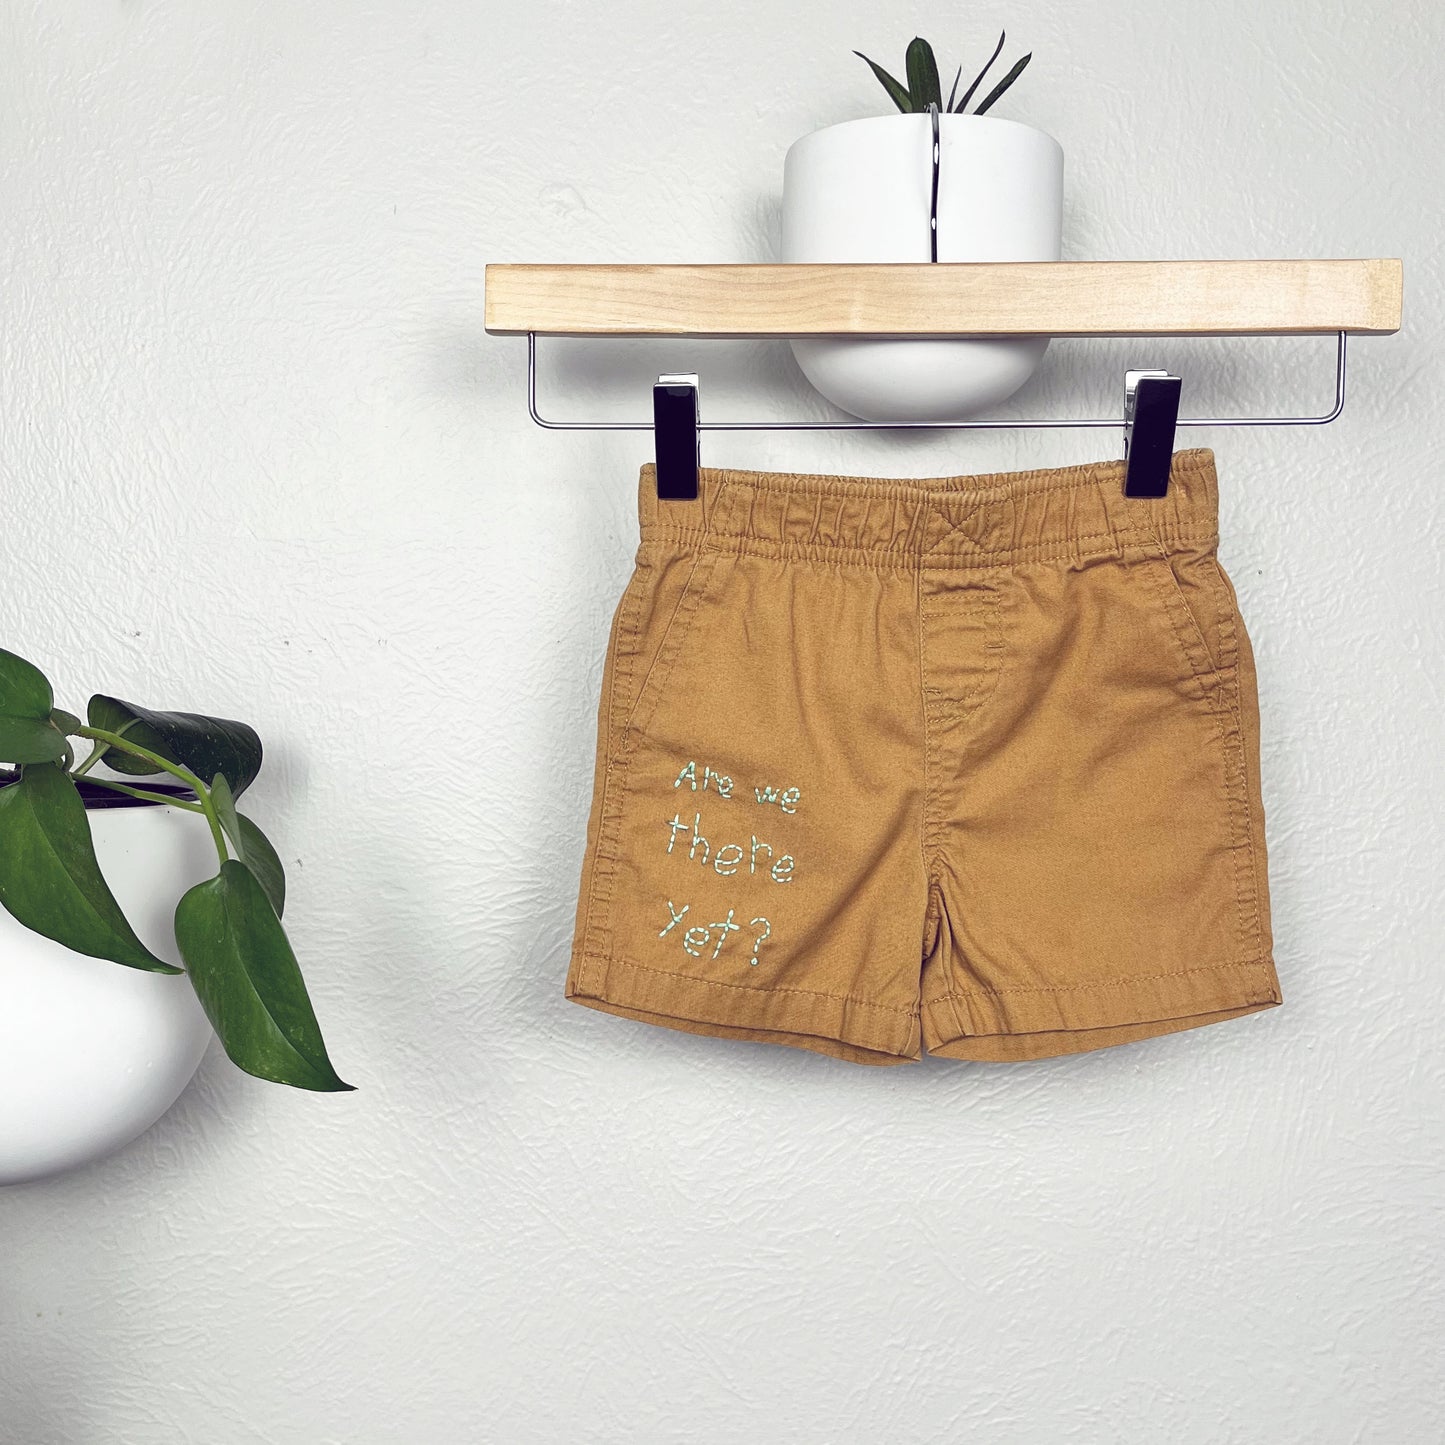 small camel colored shorts hanging from a wooden hanger, the words "are we there yet?" are hand embroidered on the lower right leg, there is a pothos plant in a round white pot hanging on the wall near the shorts